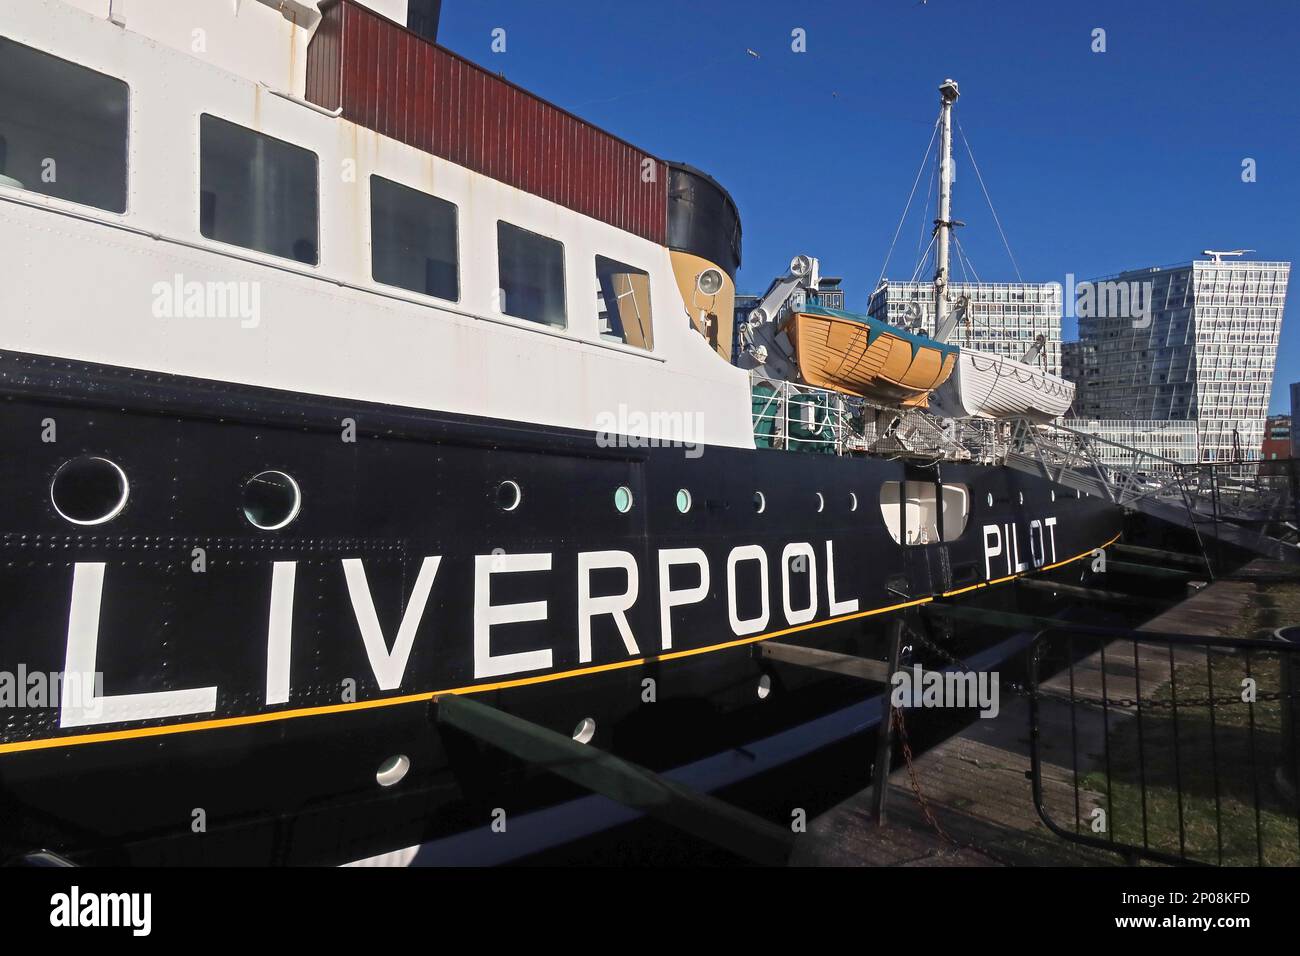 The Edmund Gardner, Liverpool Pilot cutter ship, at the Dry Dock, Royal Albert Dock, 3-4 The Colonnades, Liverpool, Merseyside, England, L3 4AA Stock Photo